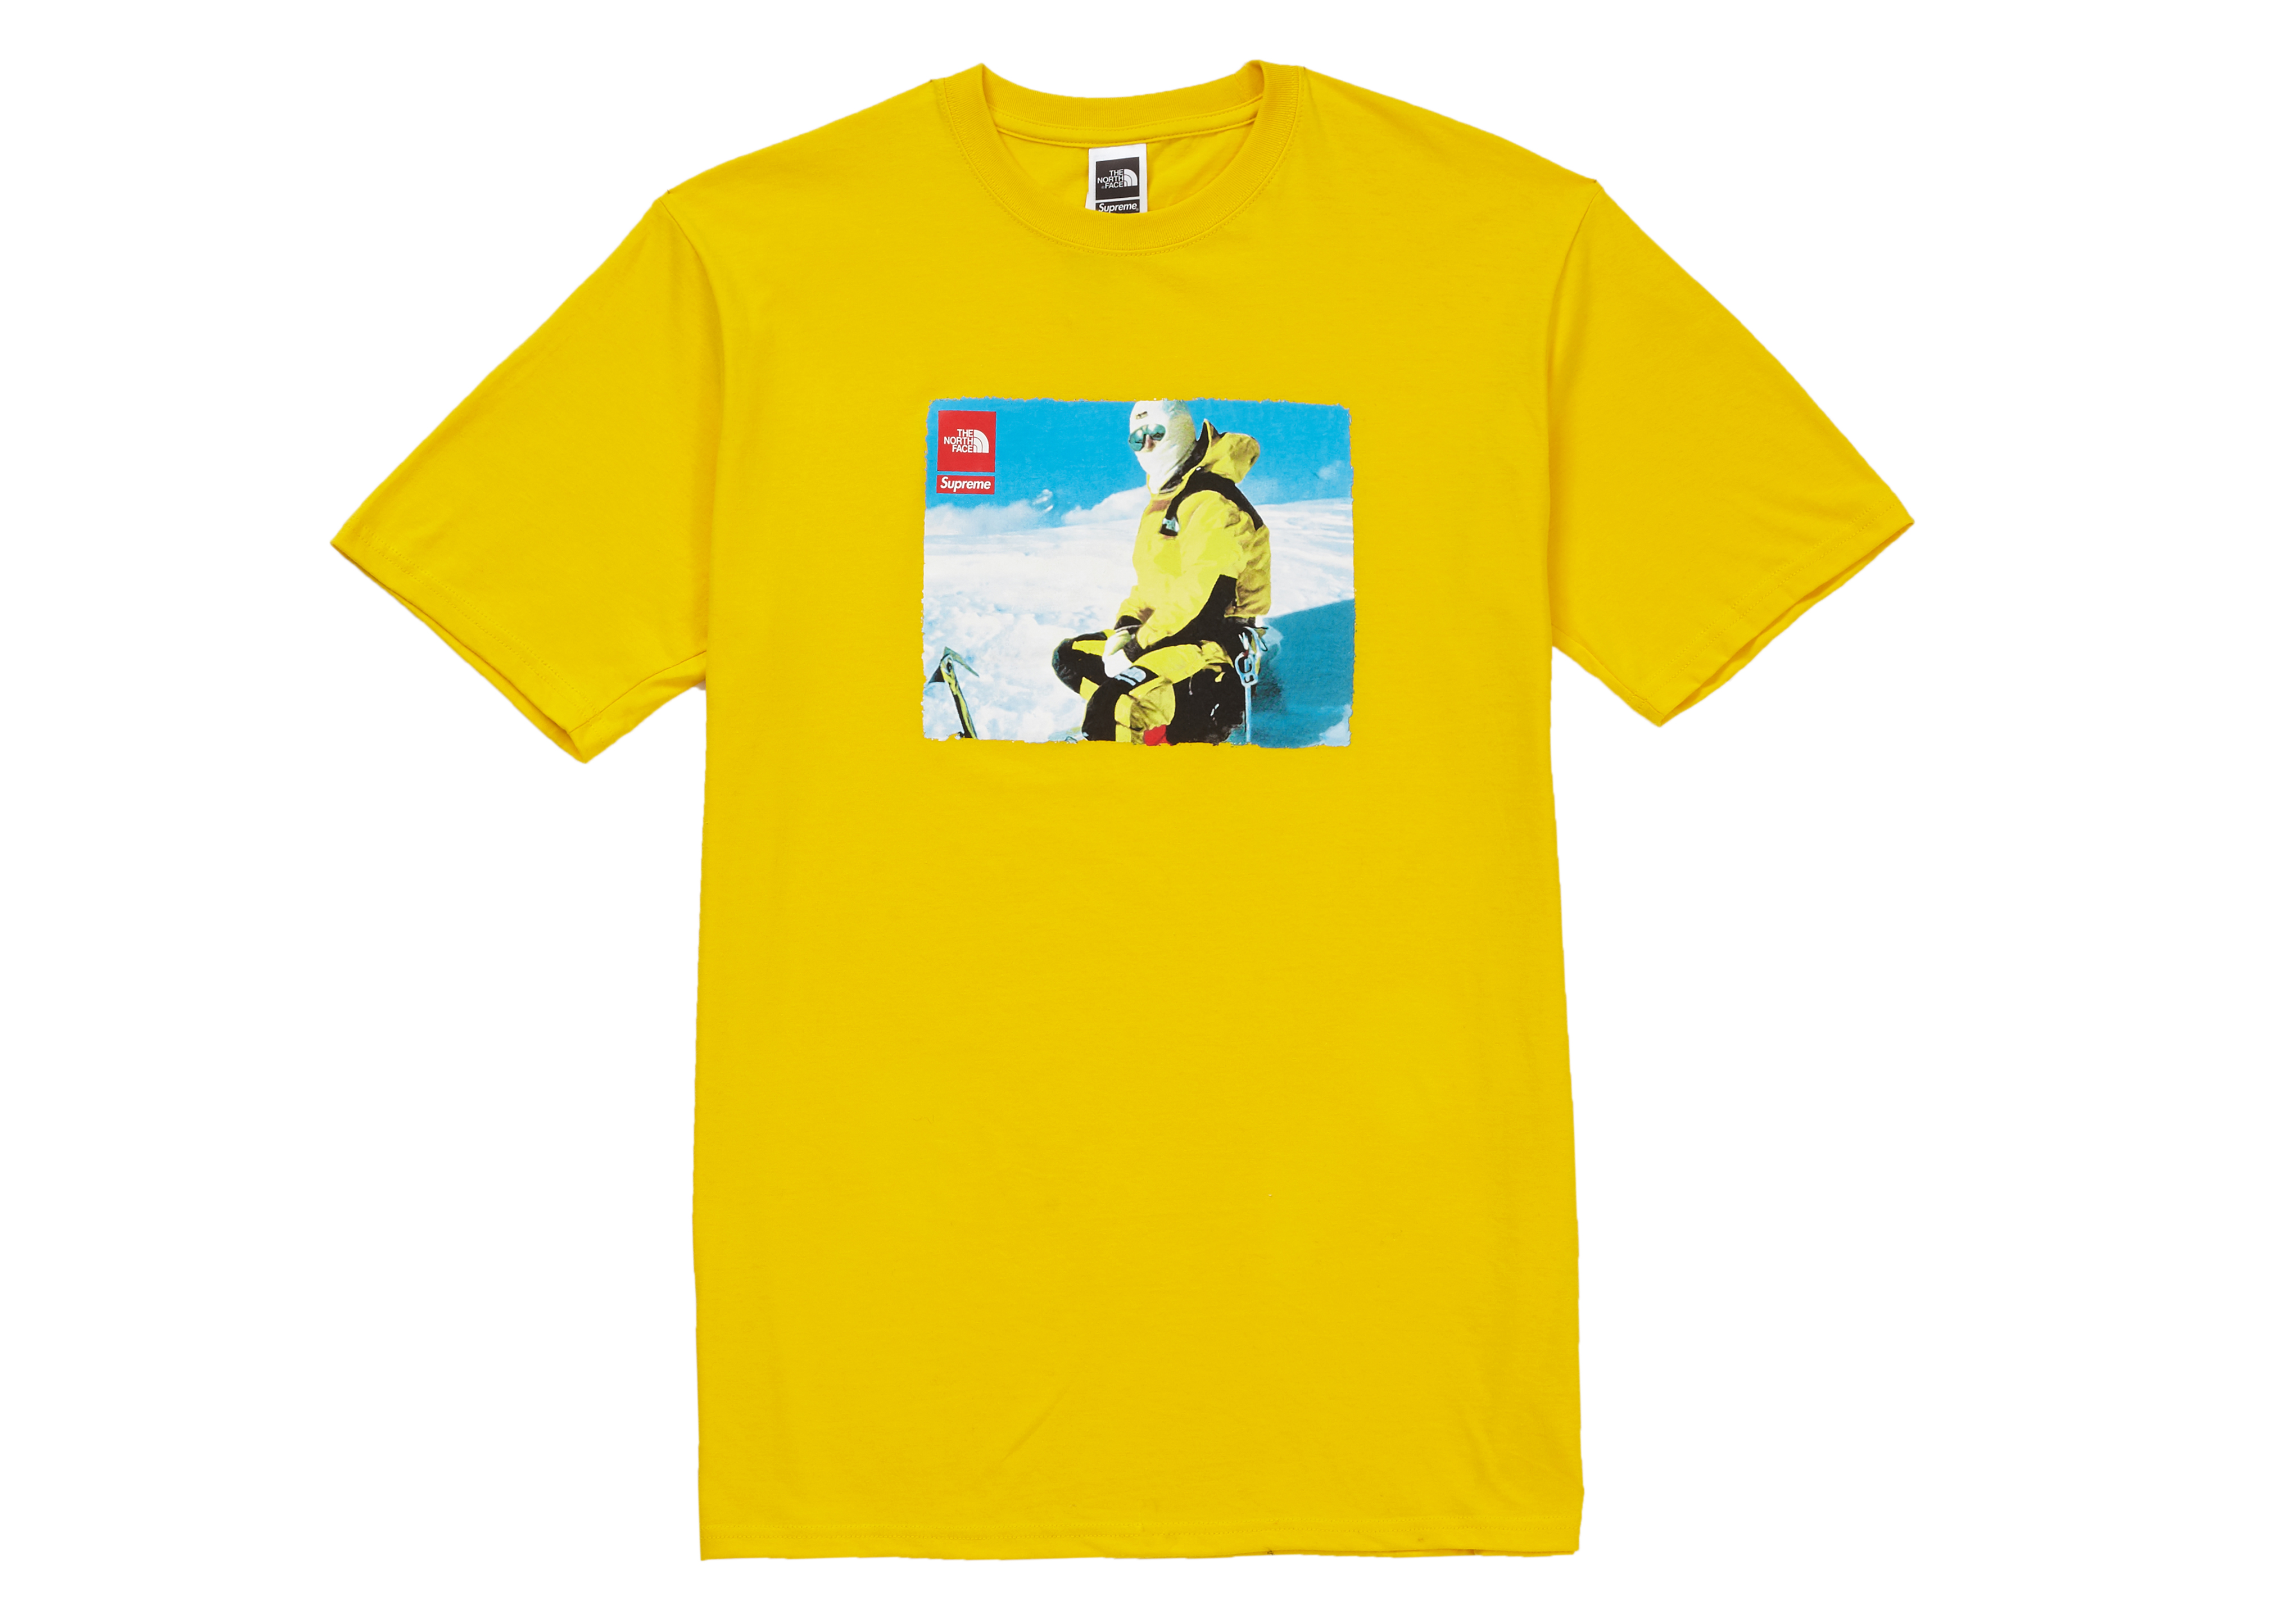 the north face t shirt yellow